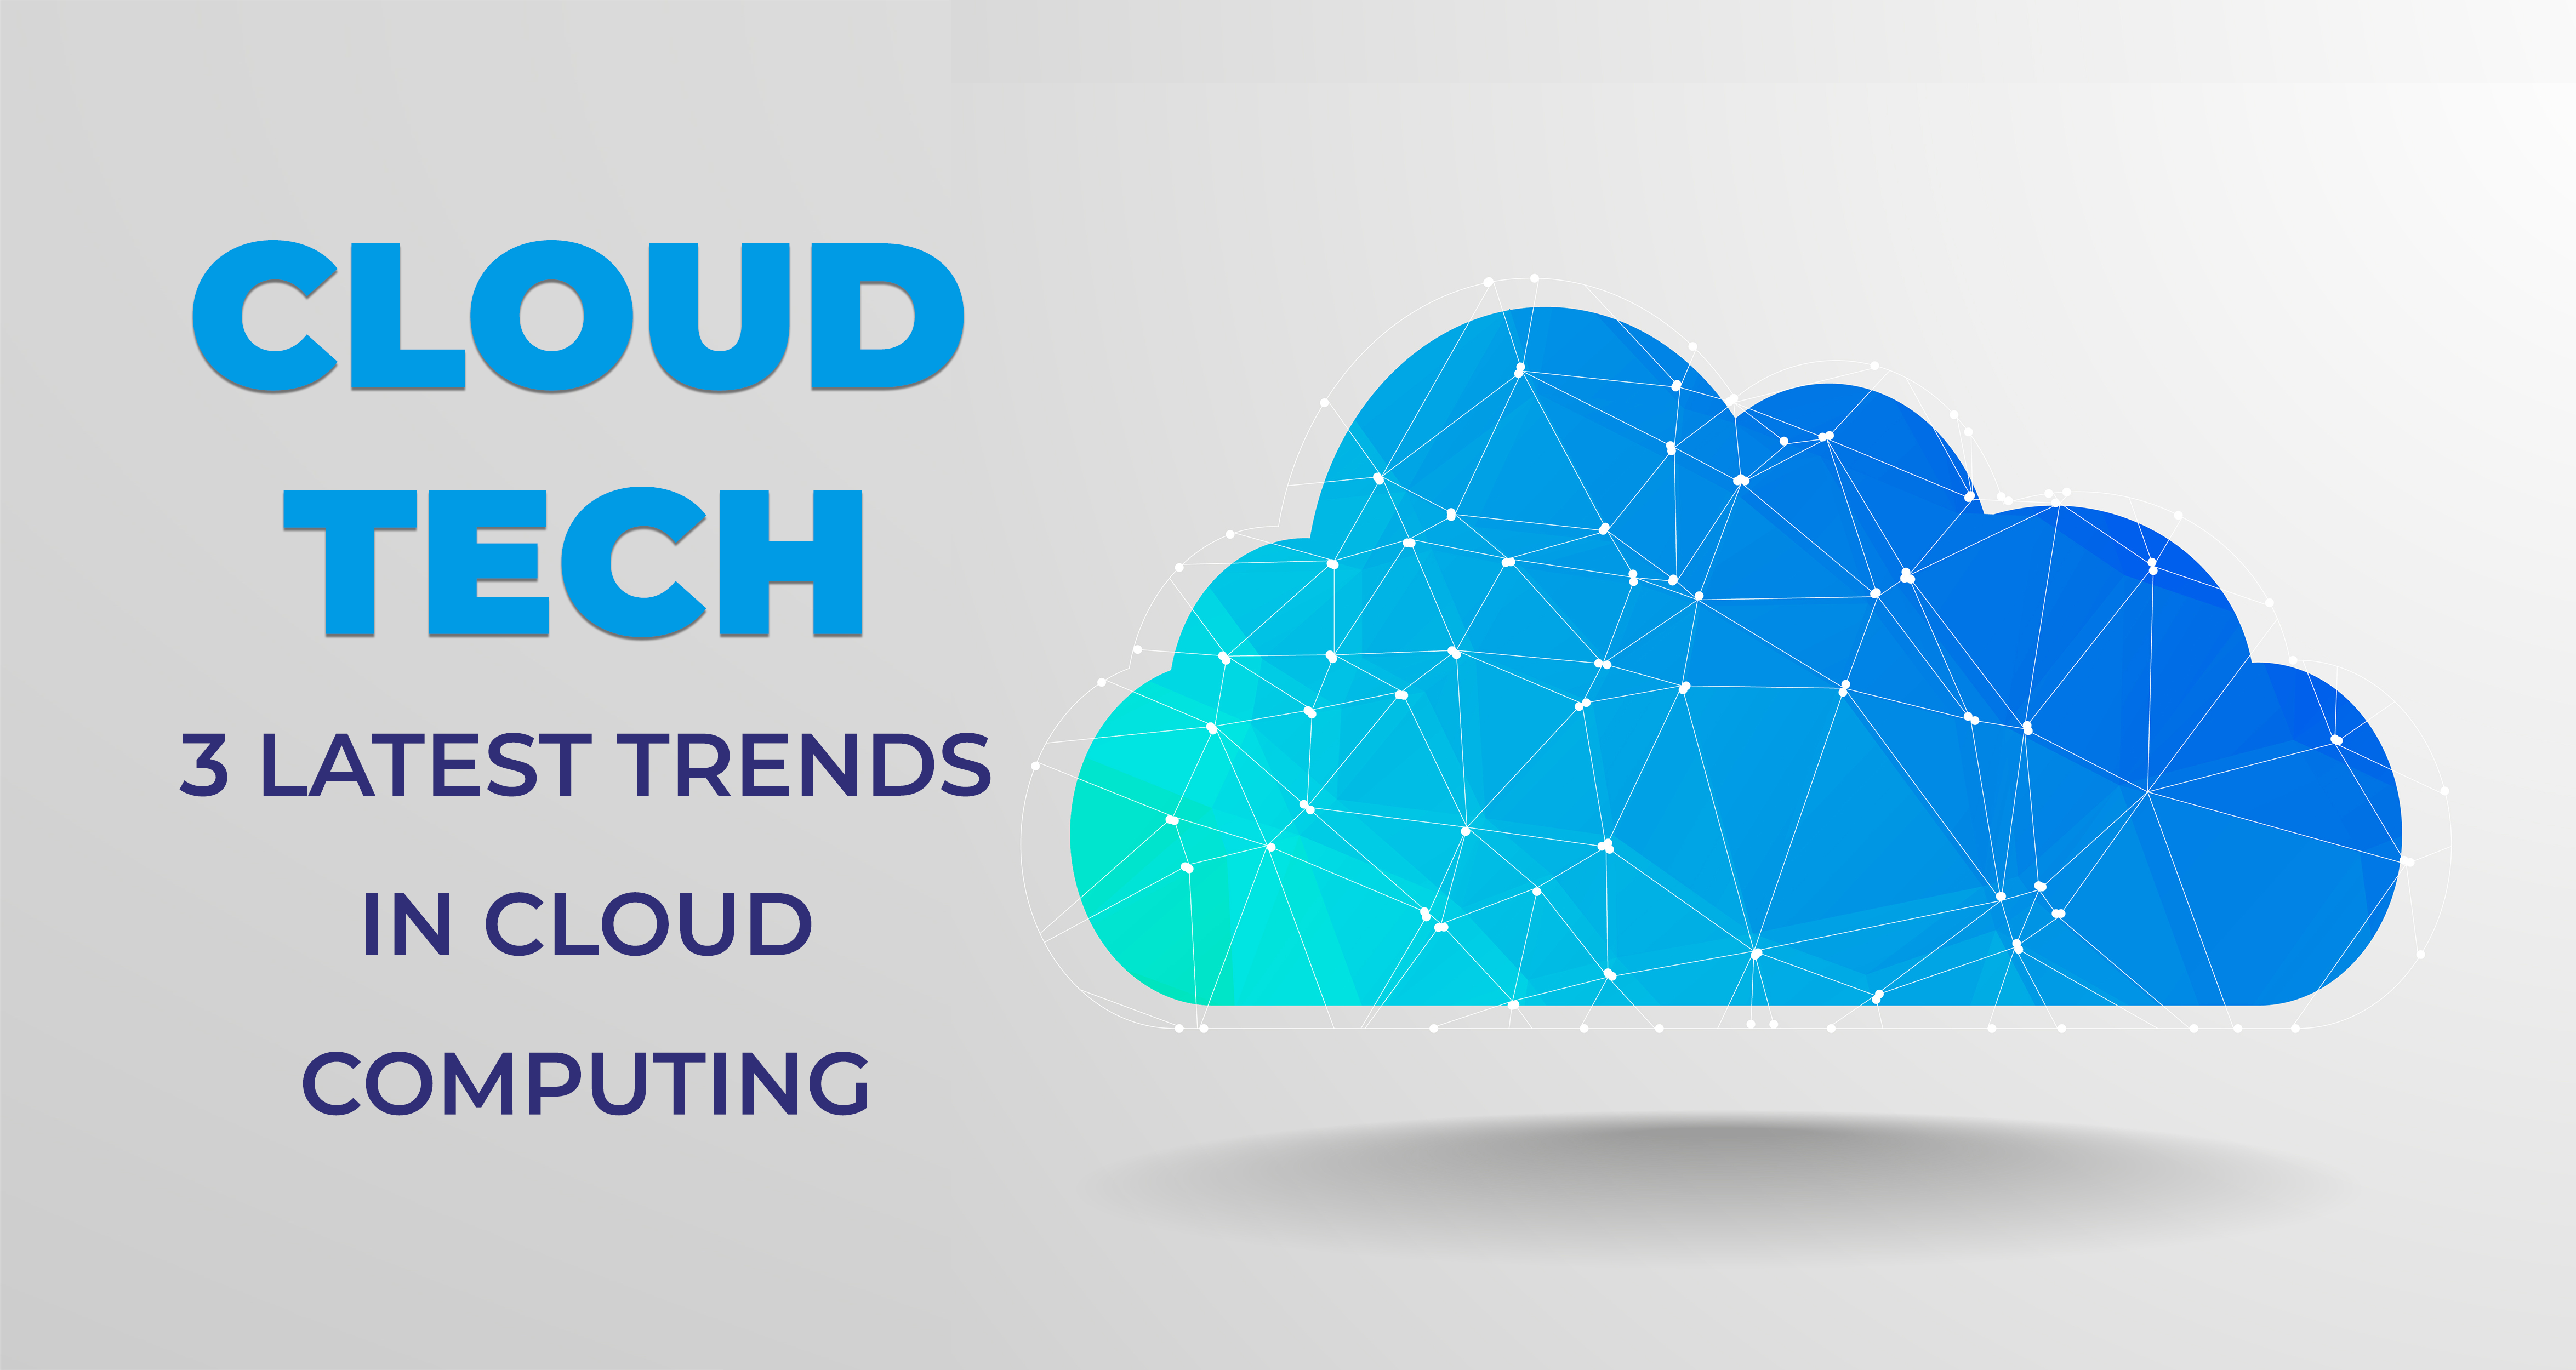 Cloud Tech - 3 Latest Trends in Cloud Computing